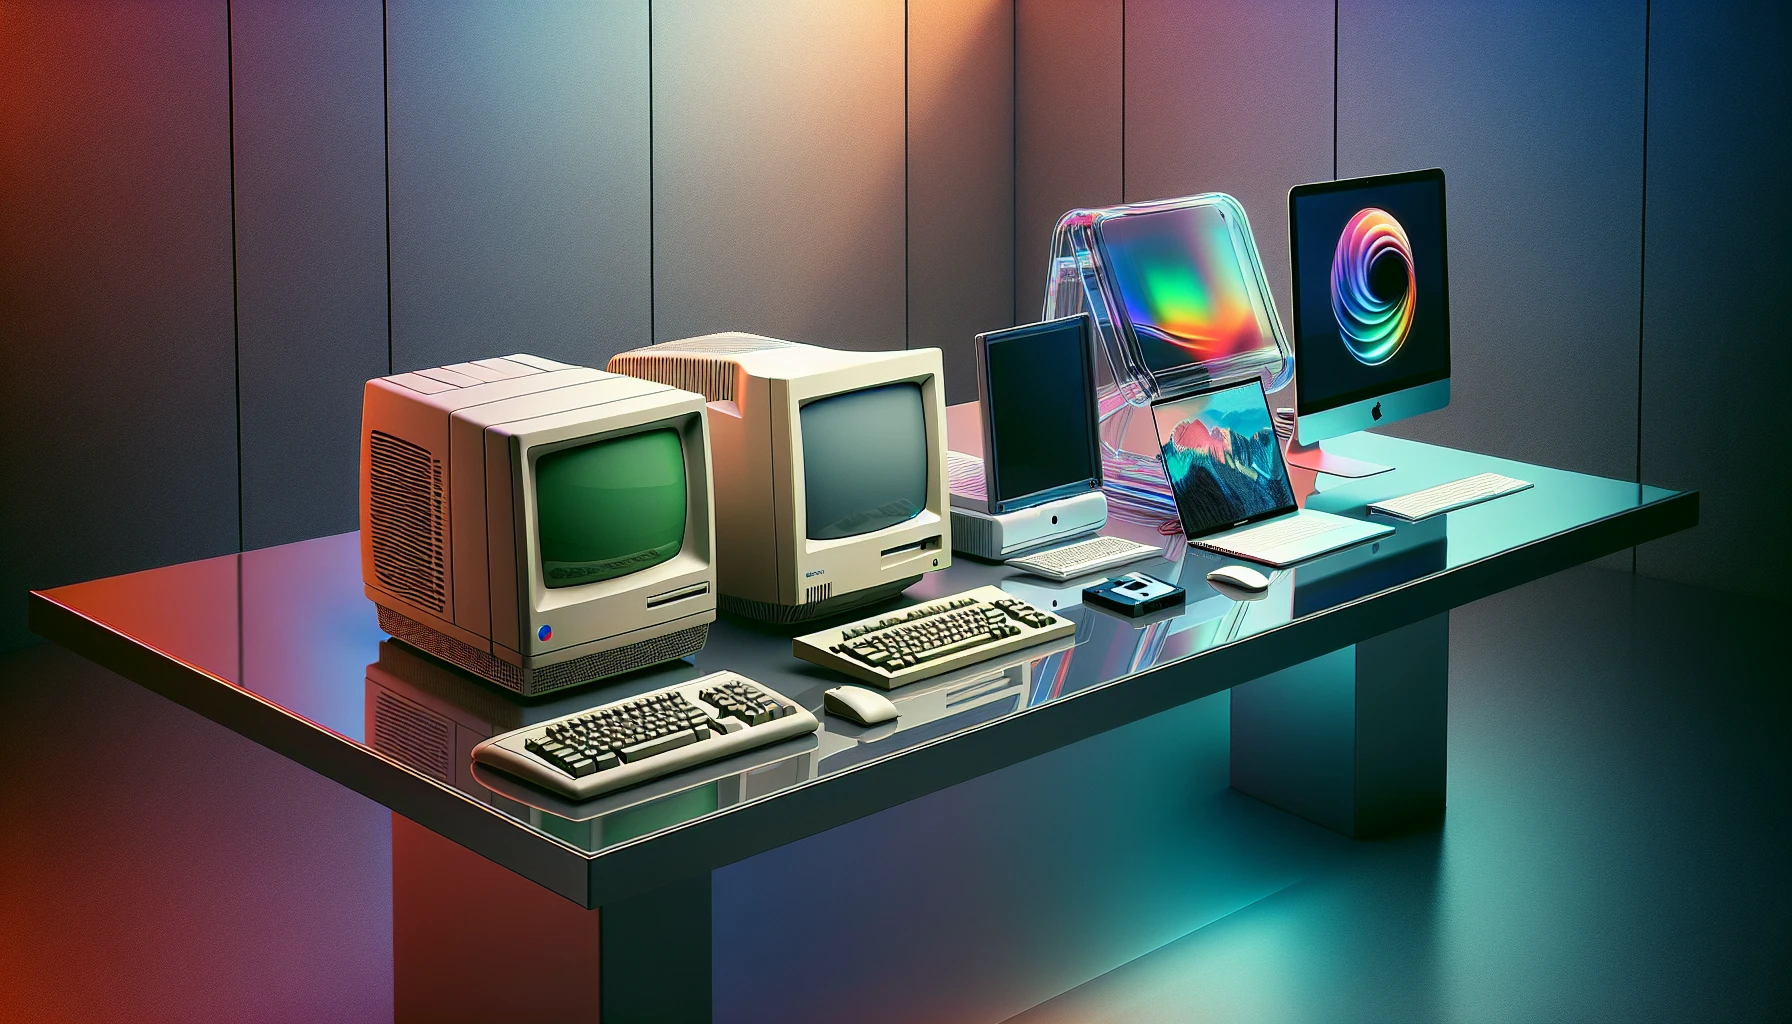 An illustration depicting the evolution of personal computers from early models to modern advancements.